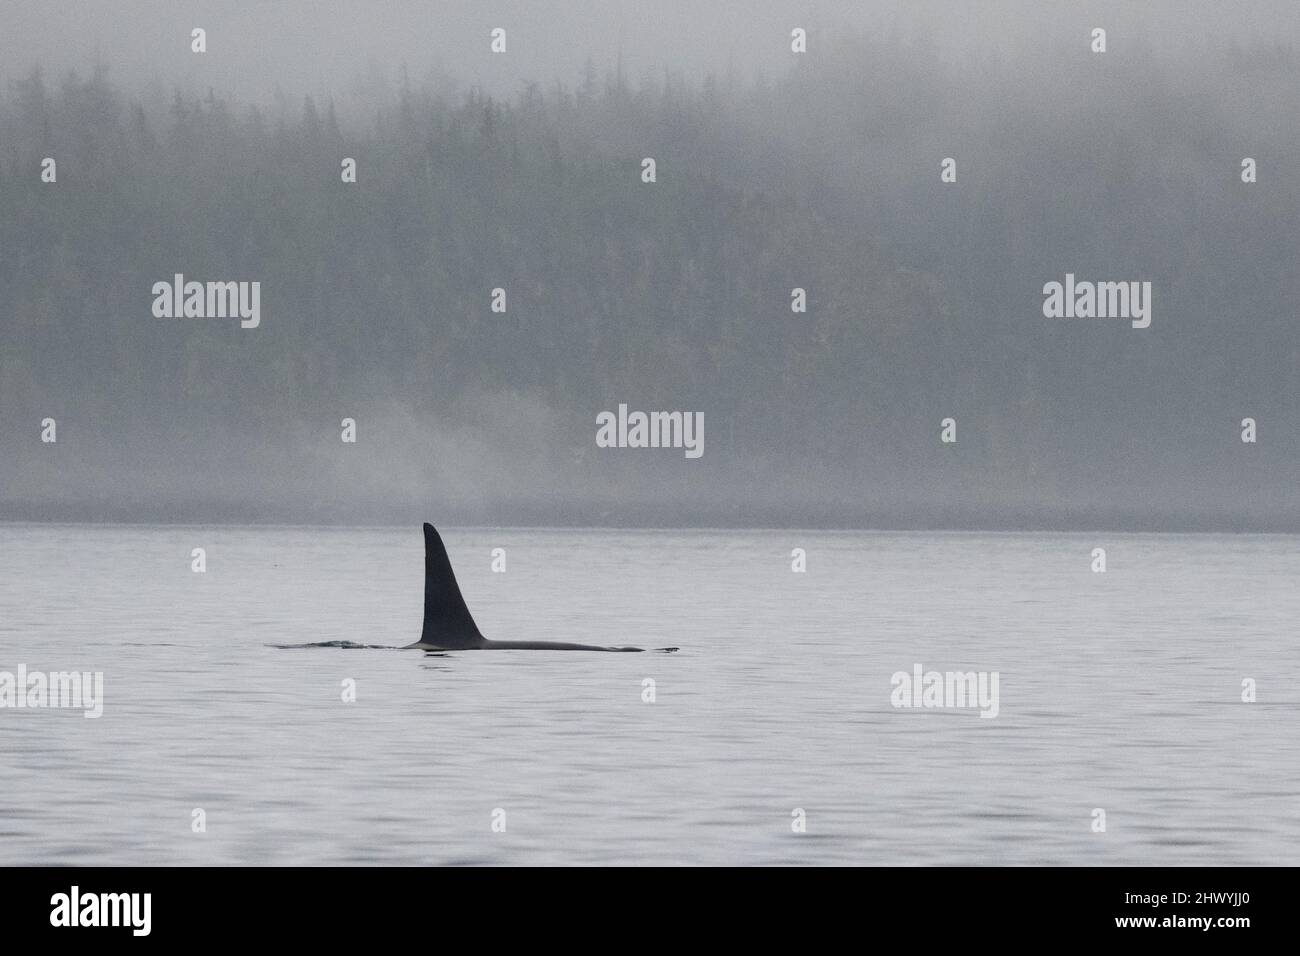 Dorasal Fin of an Orca Killer Whale breaching the ocean surface in the Johnstone Strait, North Vancouver Island, British Columbia, Canada Stock Photo